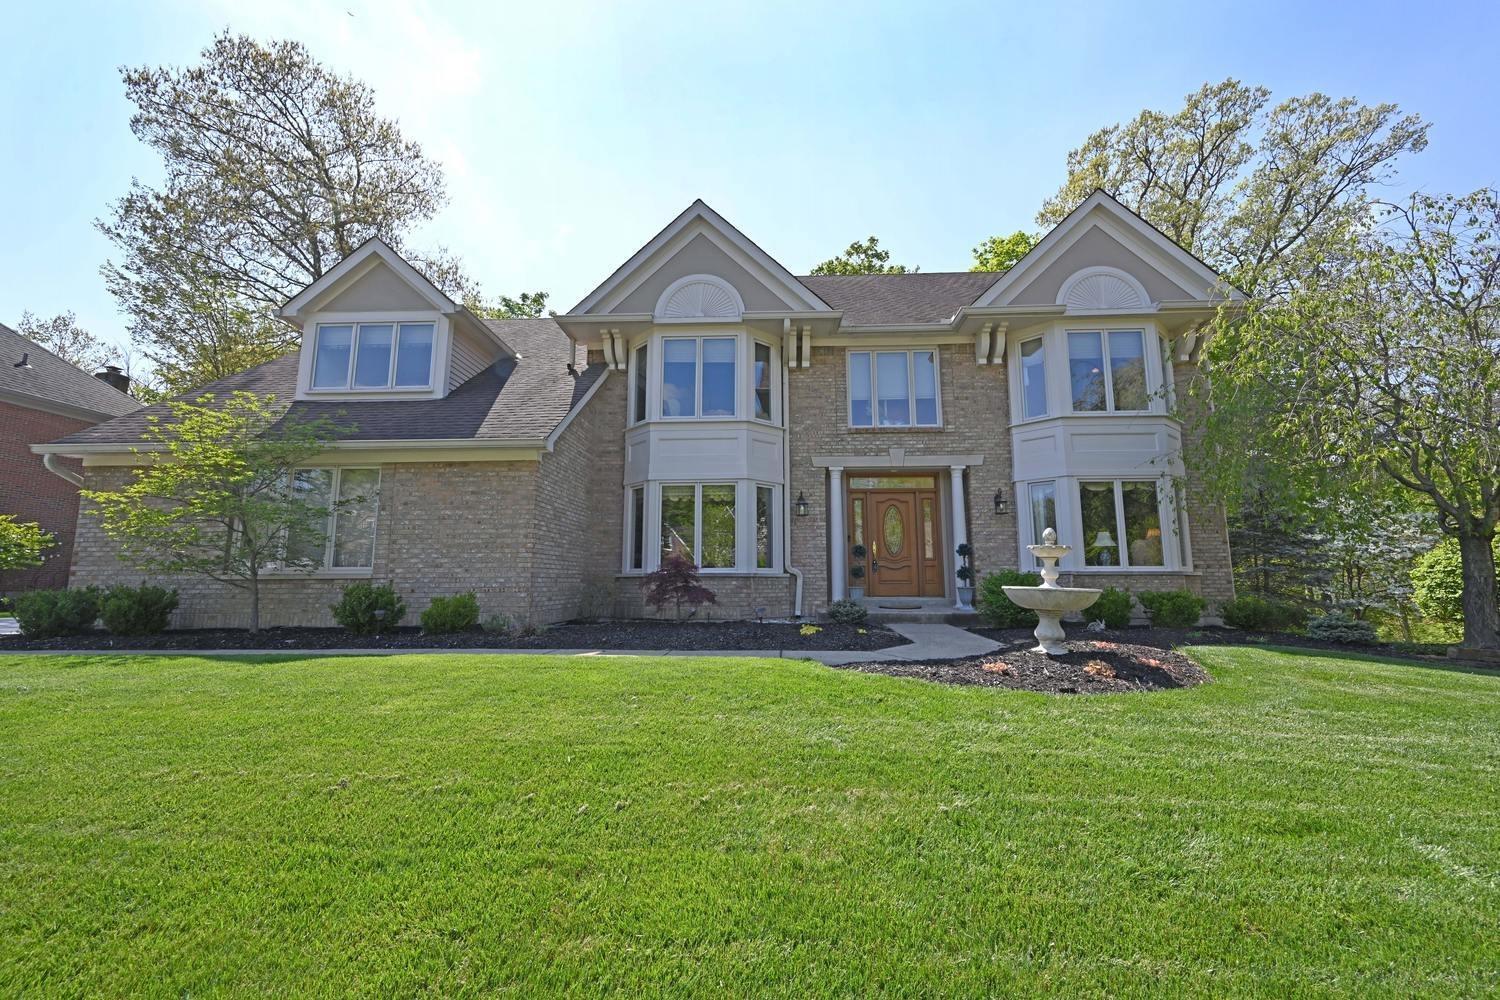 8081 Tanager Woods Ct, West Chester, OH 45069